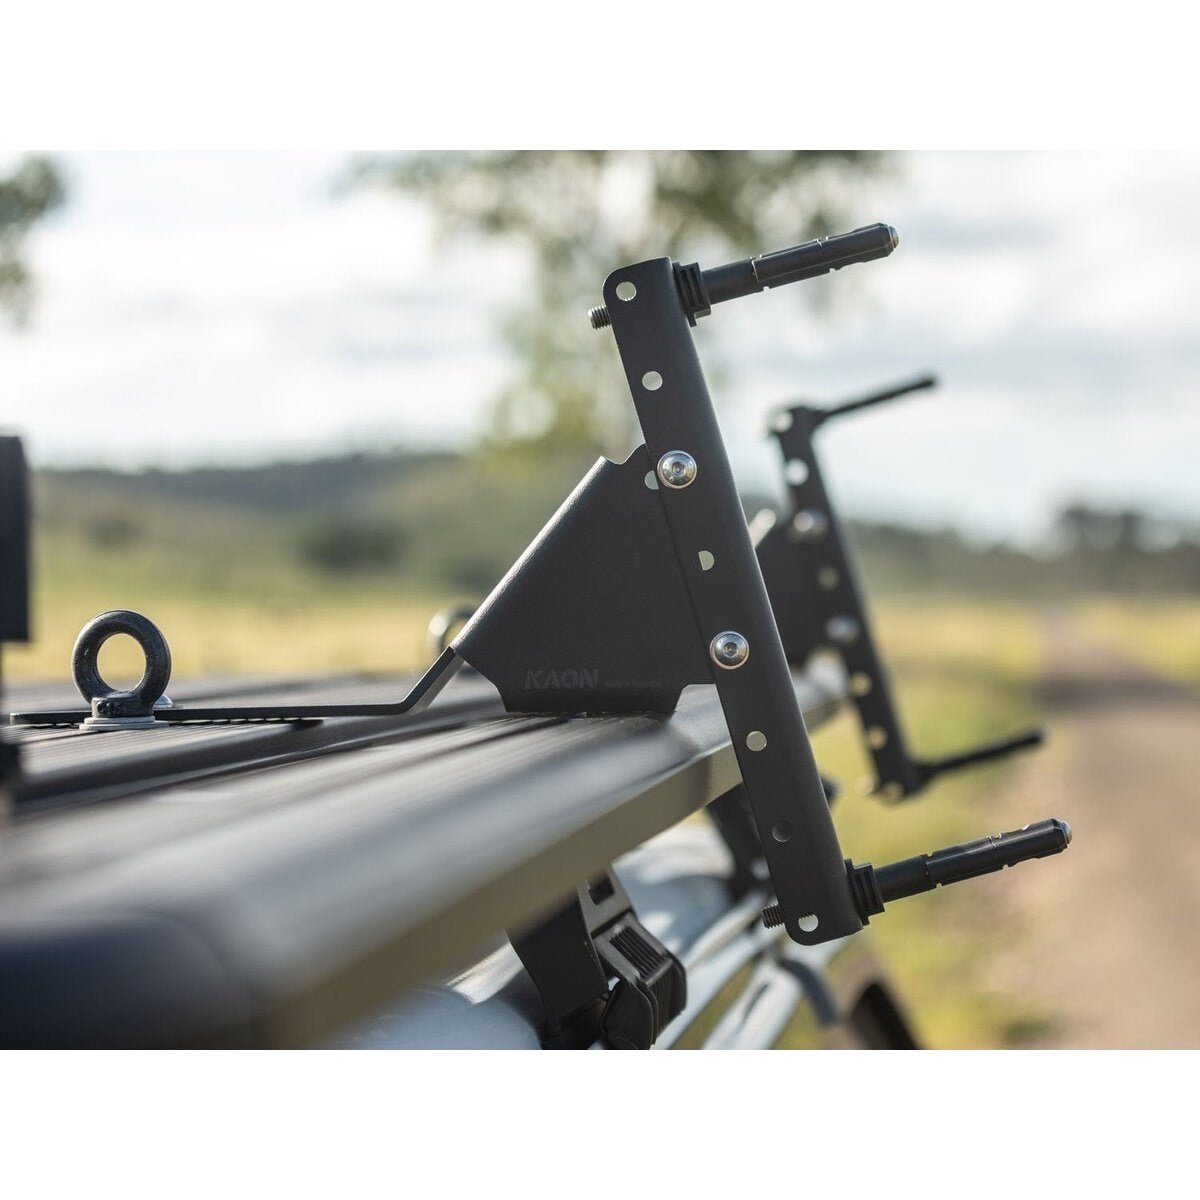 Side Mount Angled Maxtrax Brackets - AMD Touring